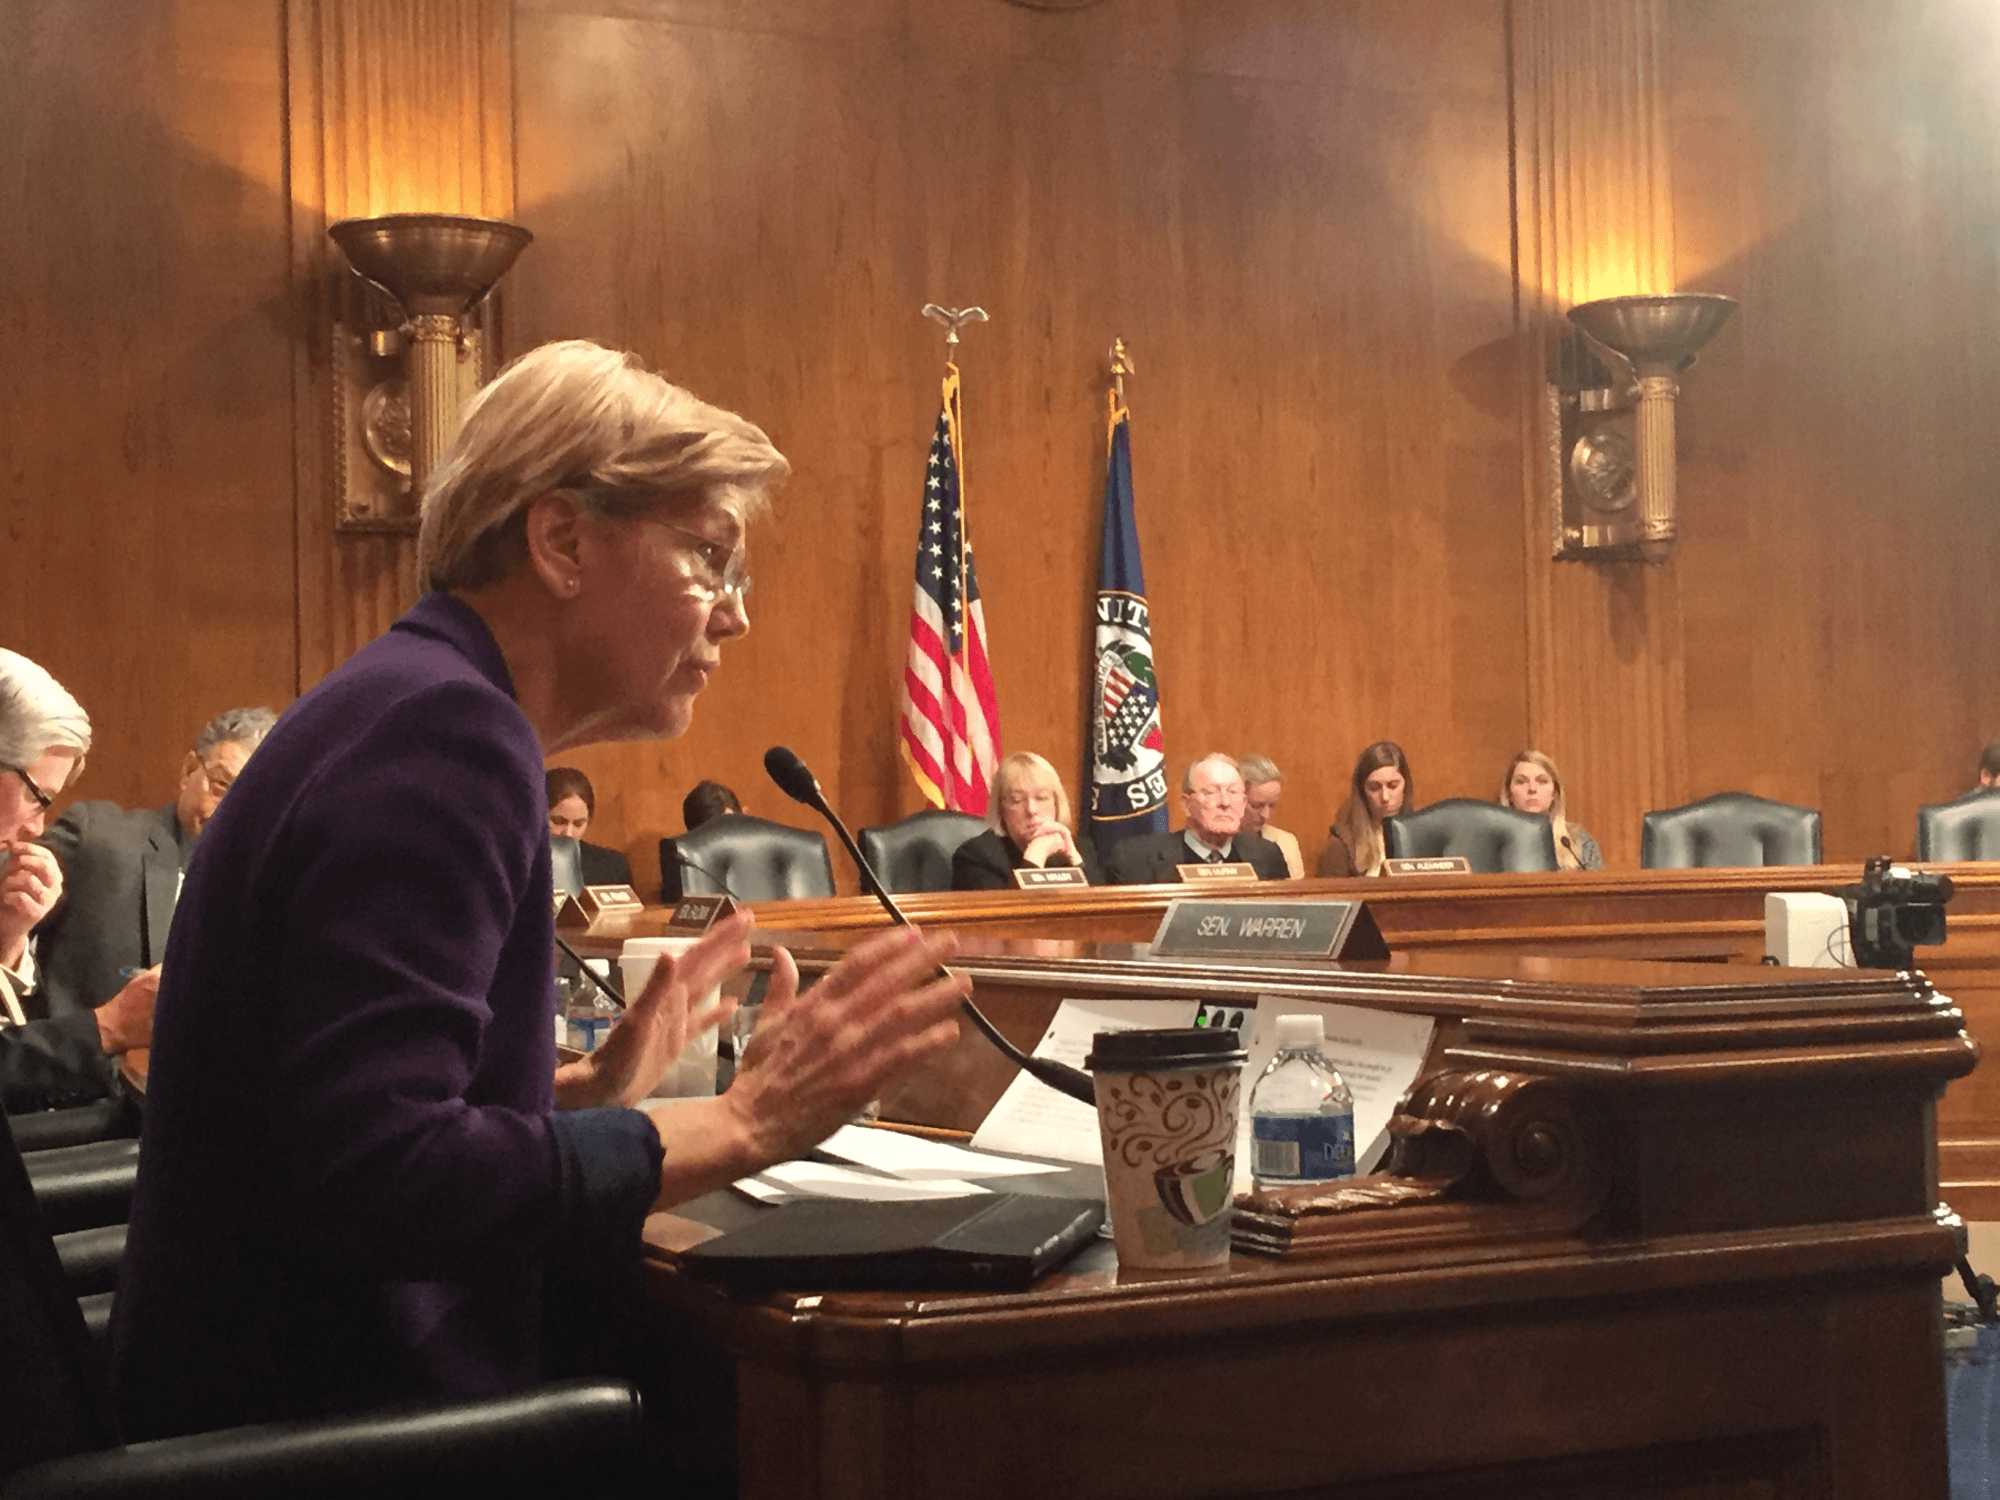 Senate Committee plans federal action to combat mental health issues